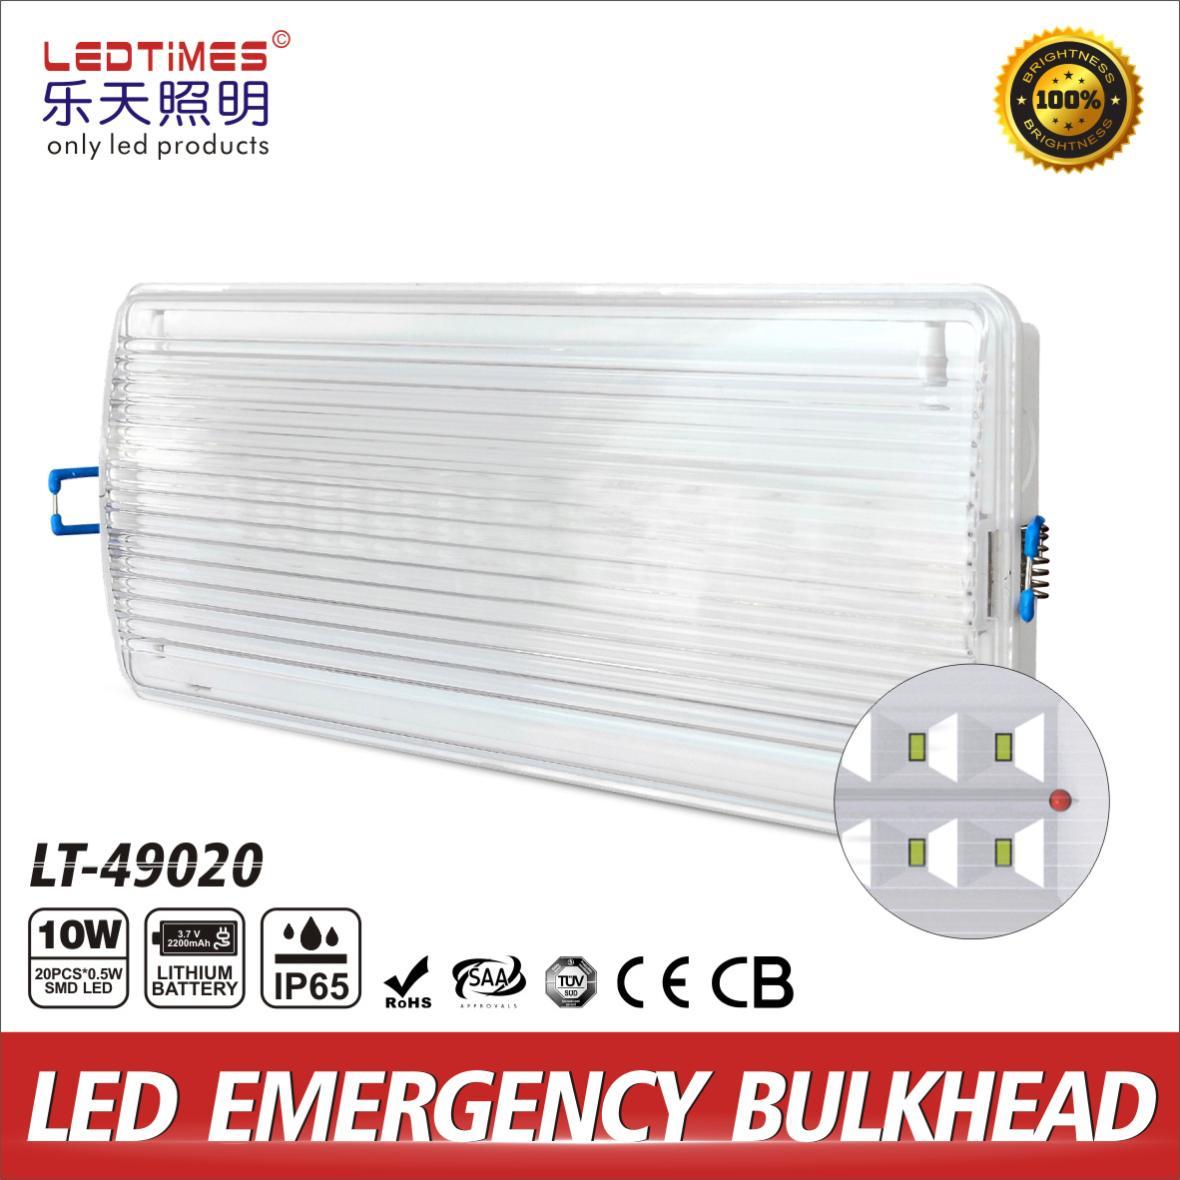 LT-49020 Emergency Light products